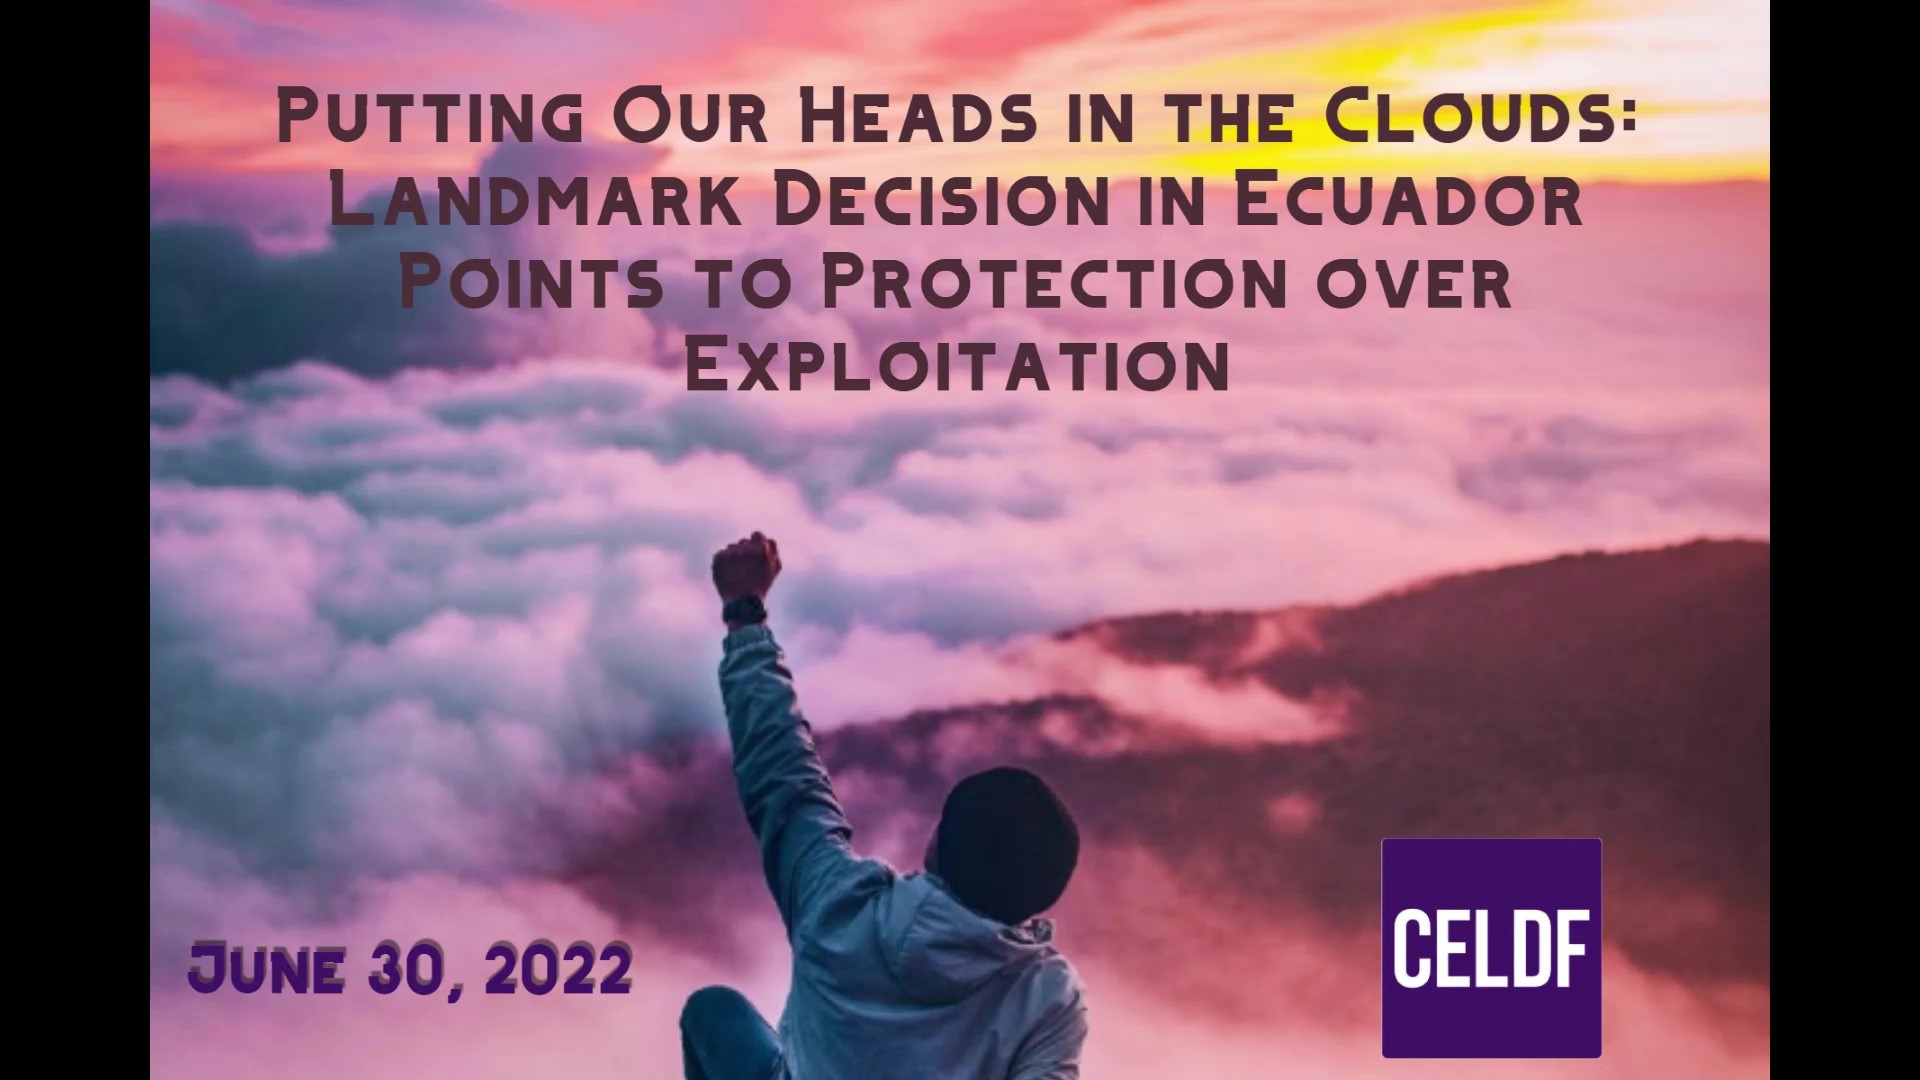 Available Now: English Translation & Webinar of the Landmark Decision in Ecuador to Protect Los Cedros Forest over Mining Profits - CELDF